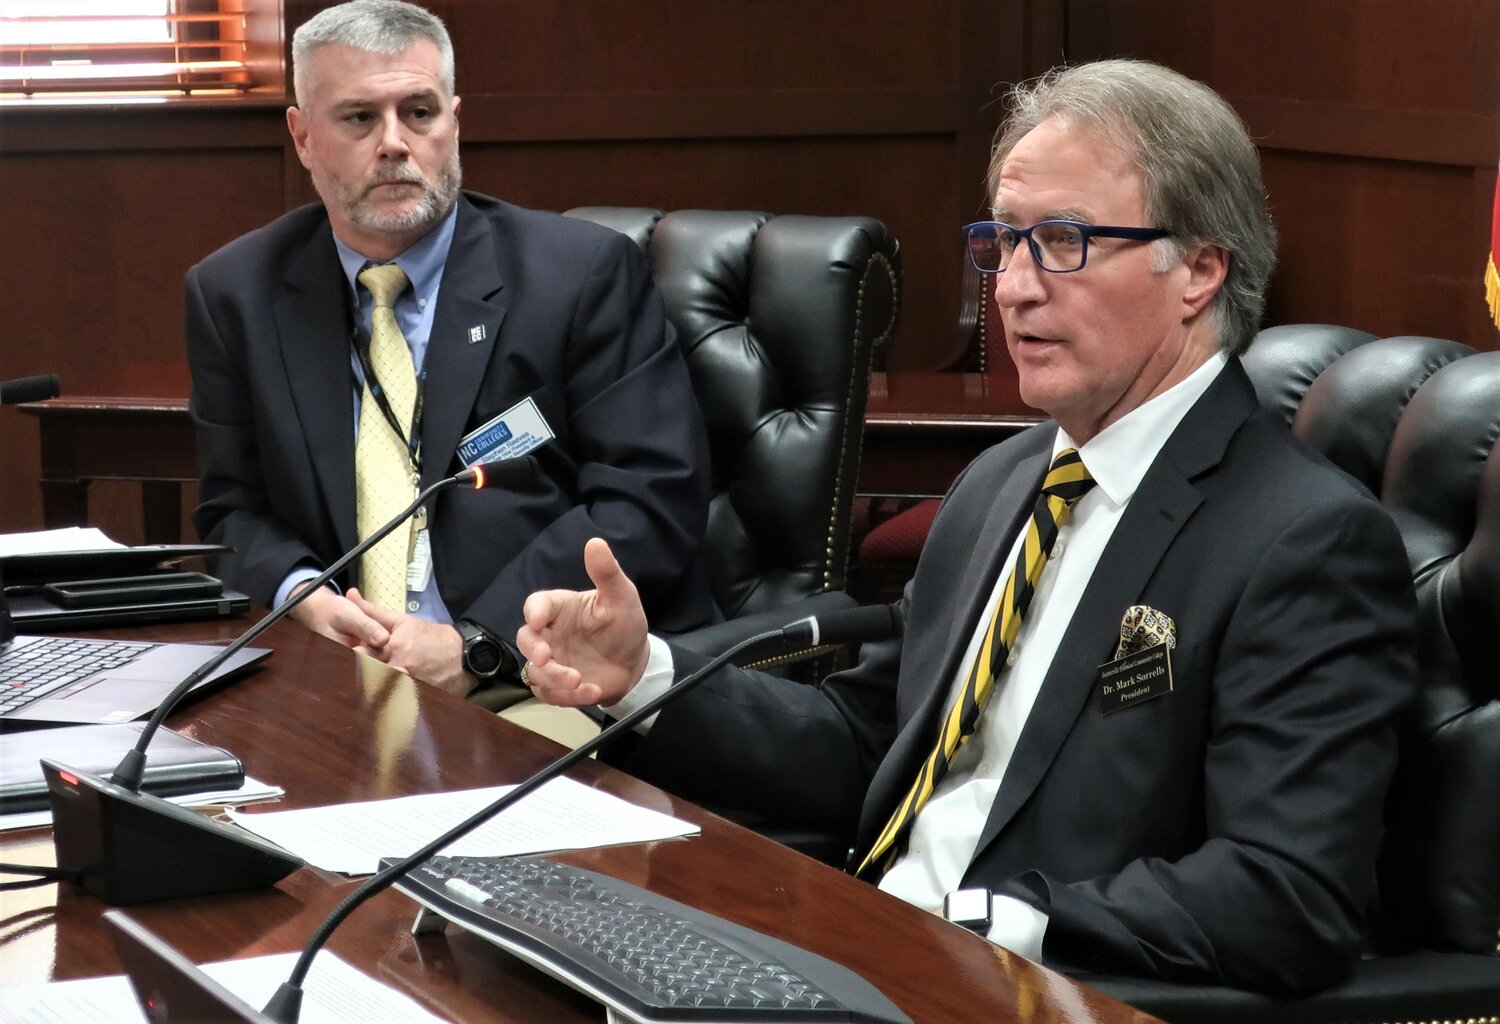 Fayetteville Technical Community College President Mark Sorrells speaks about the work of the Carolina Cyber Network at a meeting of the State Board of Community Colleges